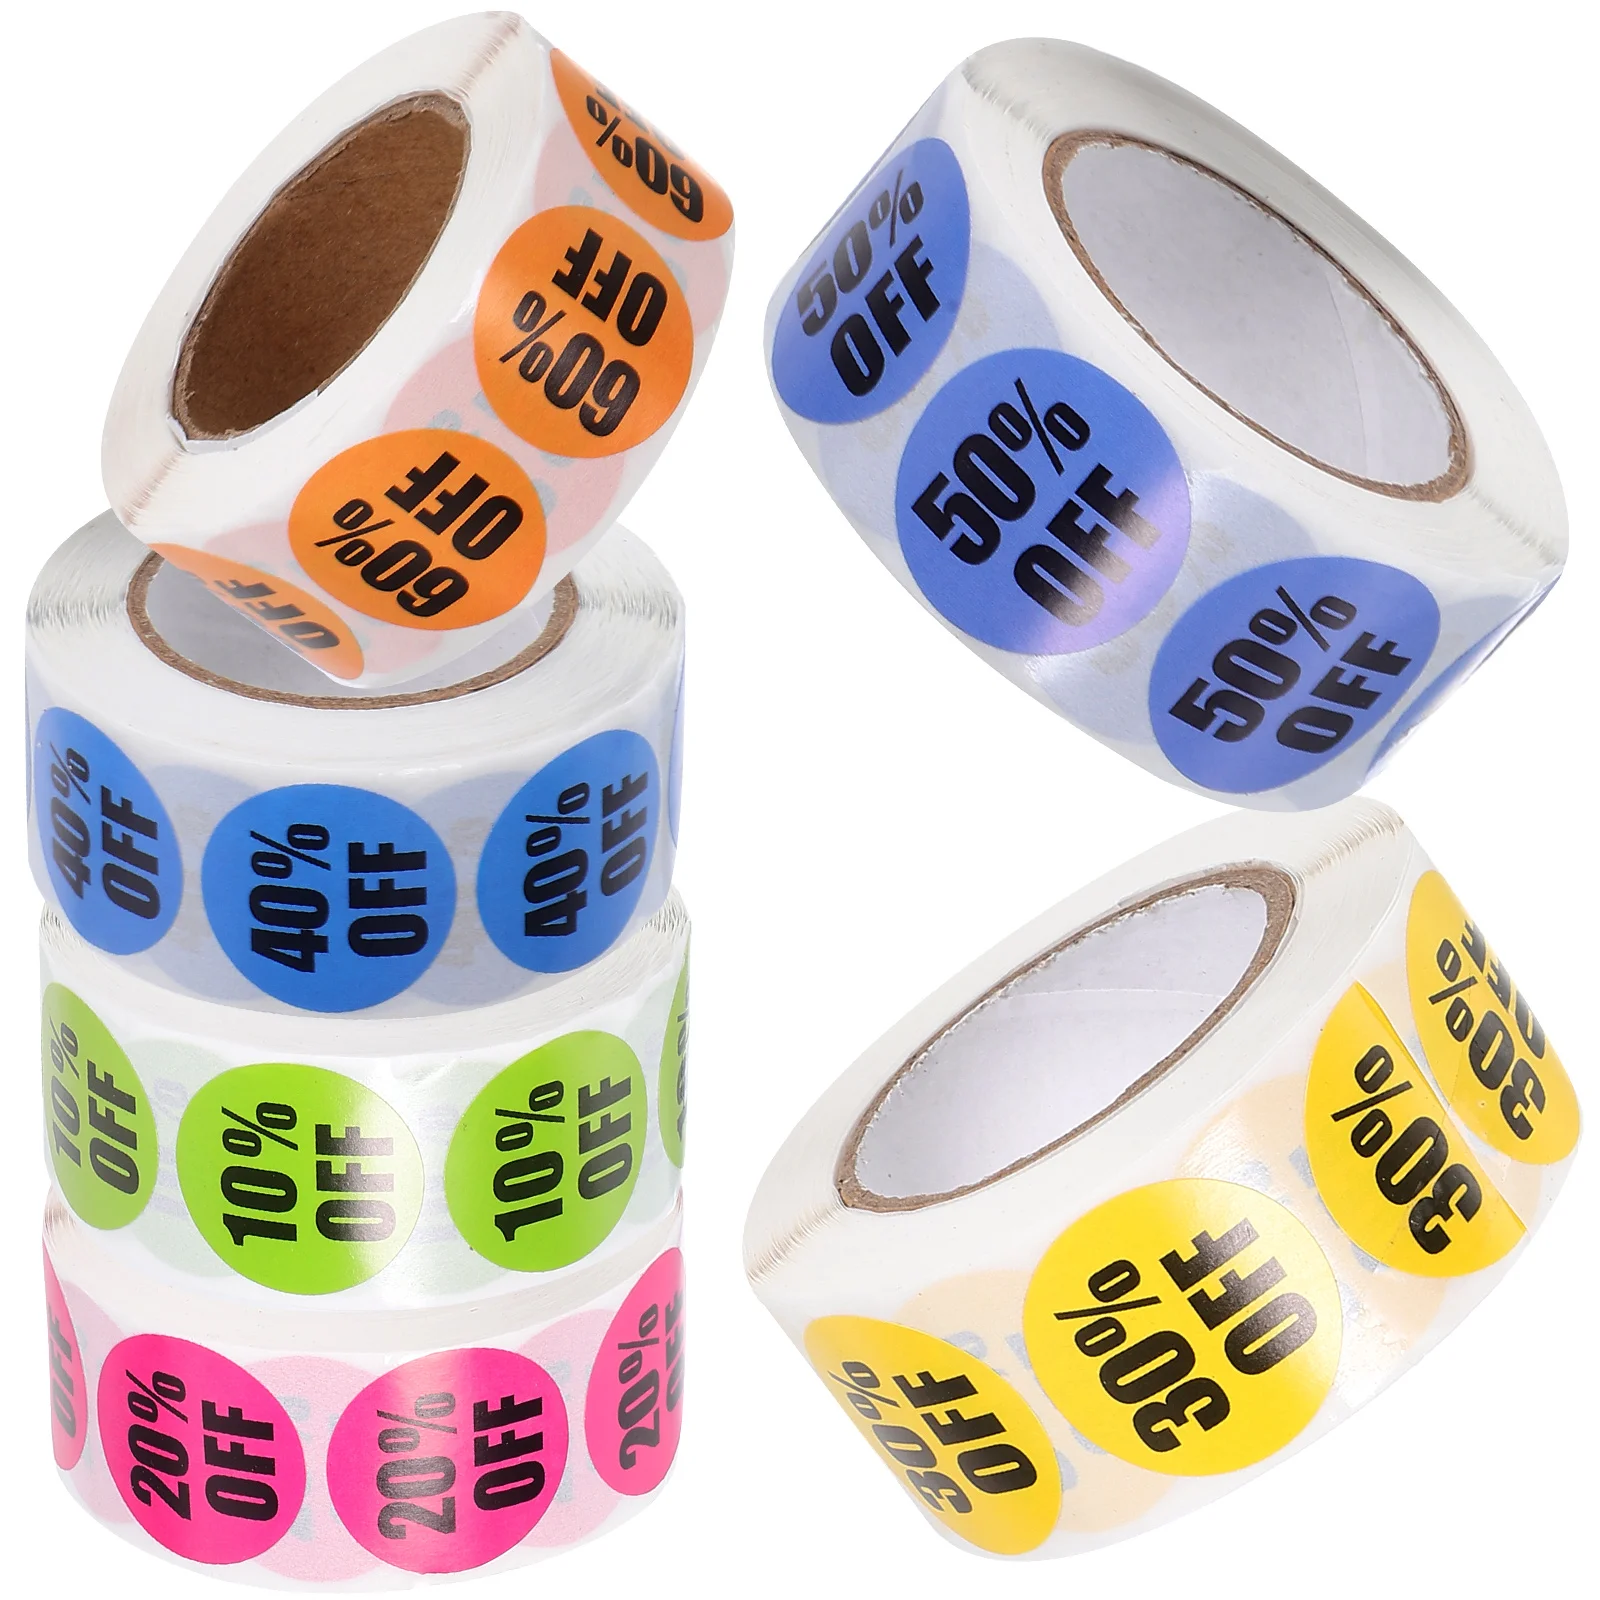 

6 Rolls Circle Percent off Decals Supermarket Discount Labels Retail Tags Nail Sticker Nail Round Store Price for Small Business